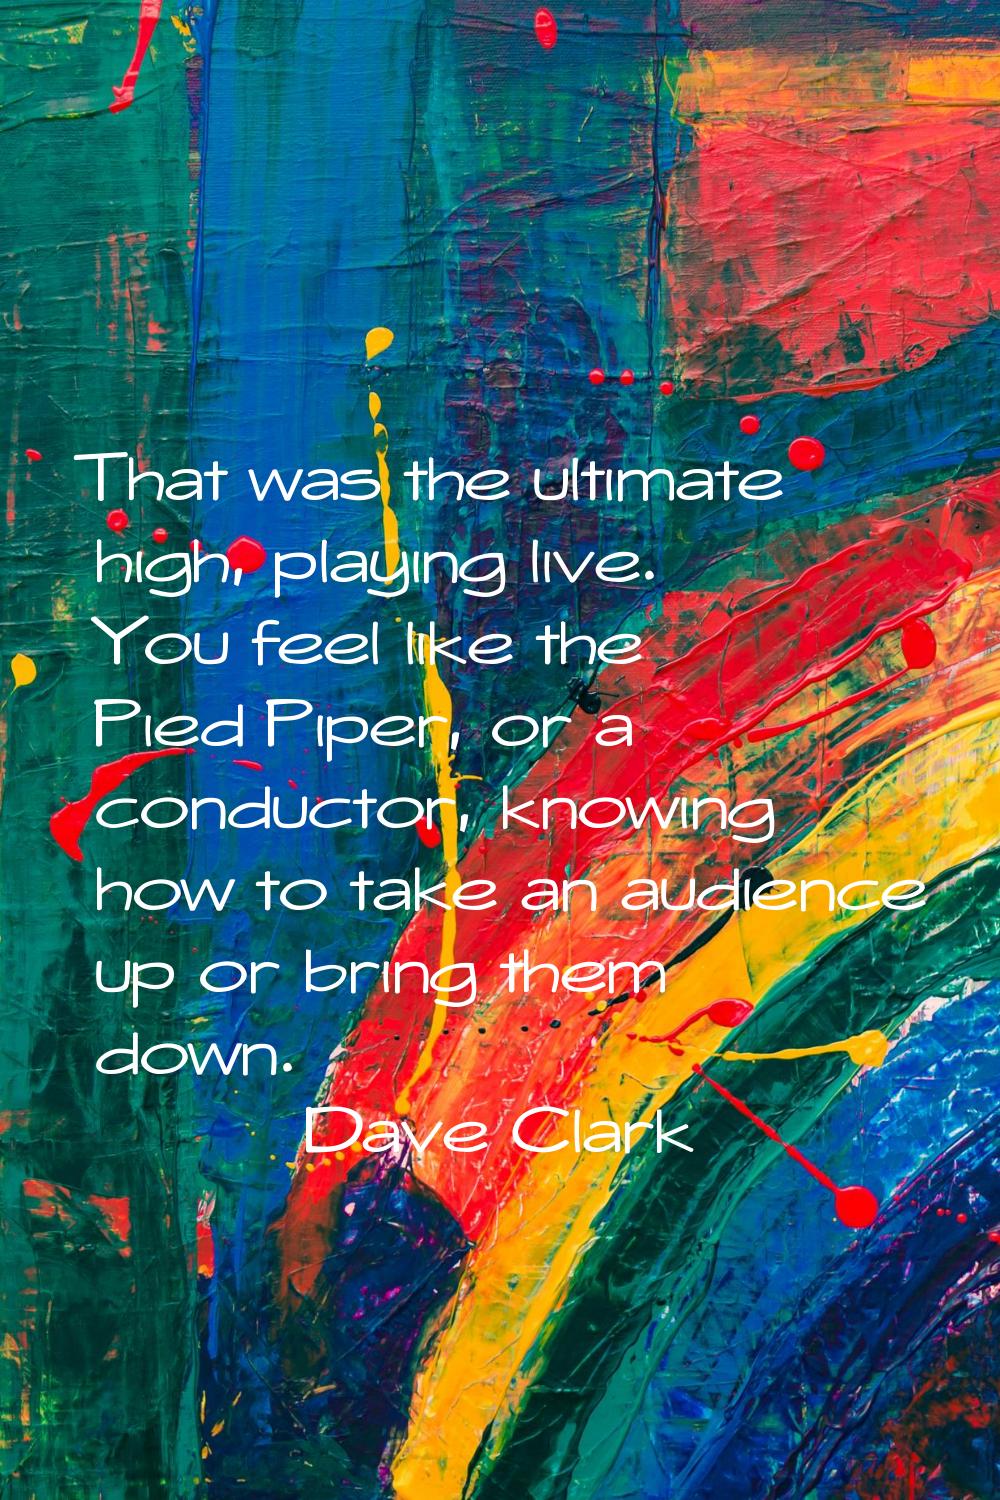 That was the ultimate high, playing live. You feel like the Pied Piper, or a conductor, knowing how